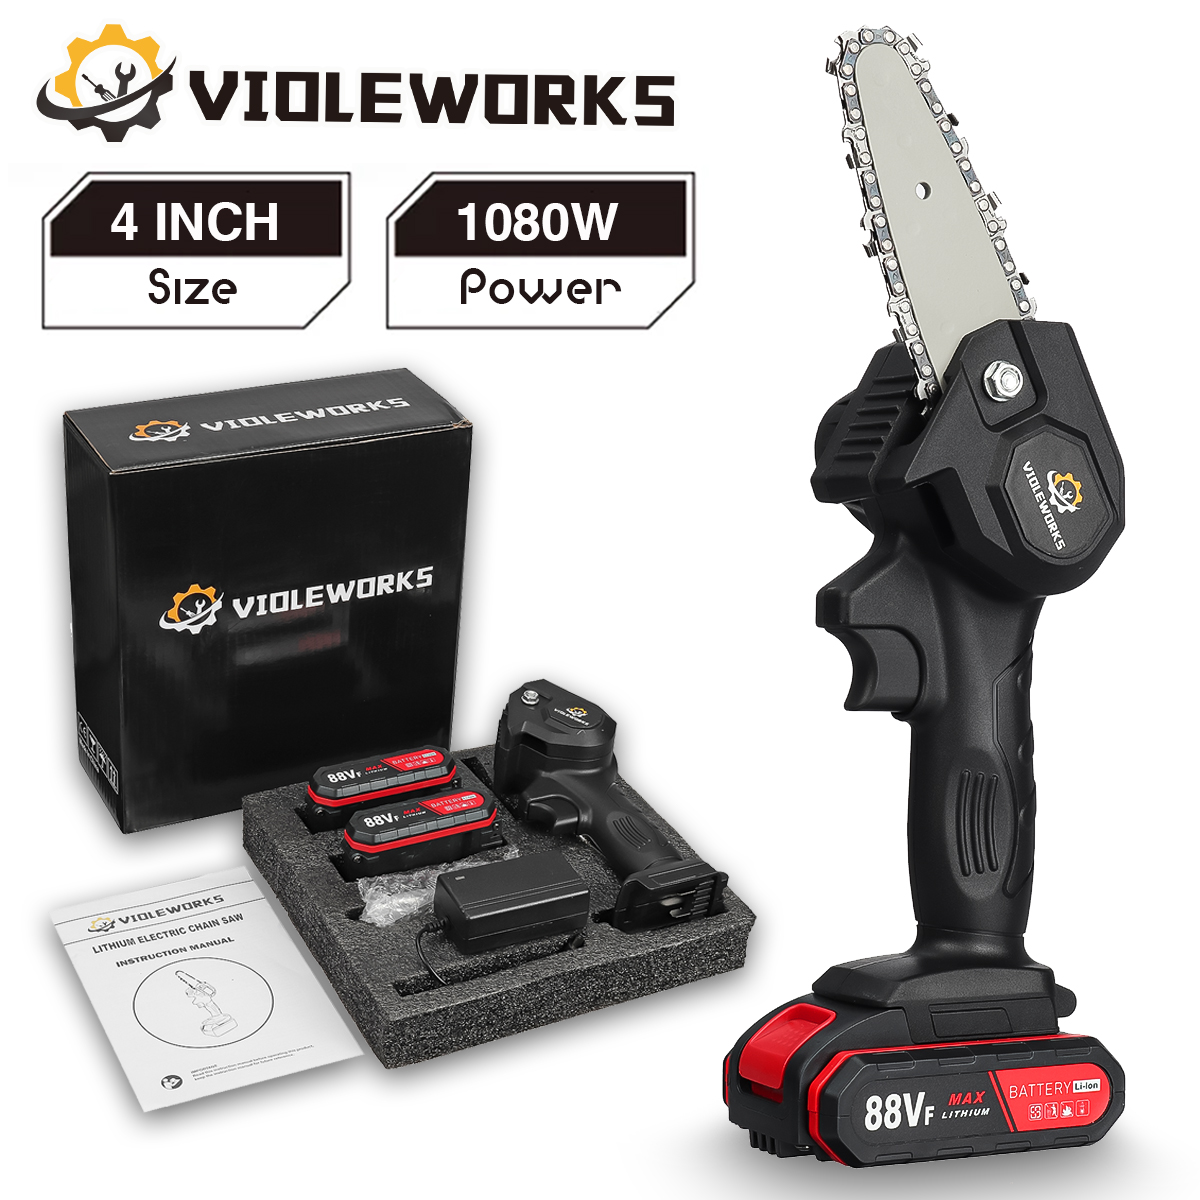 VIOLEWORKS-4-Inches-88VF-Cordless-Electric-One-Hand-Saw-Chain-Saw-Woodworking-Cutting-Tool-W-1pc-or--1784749-3